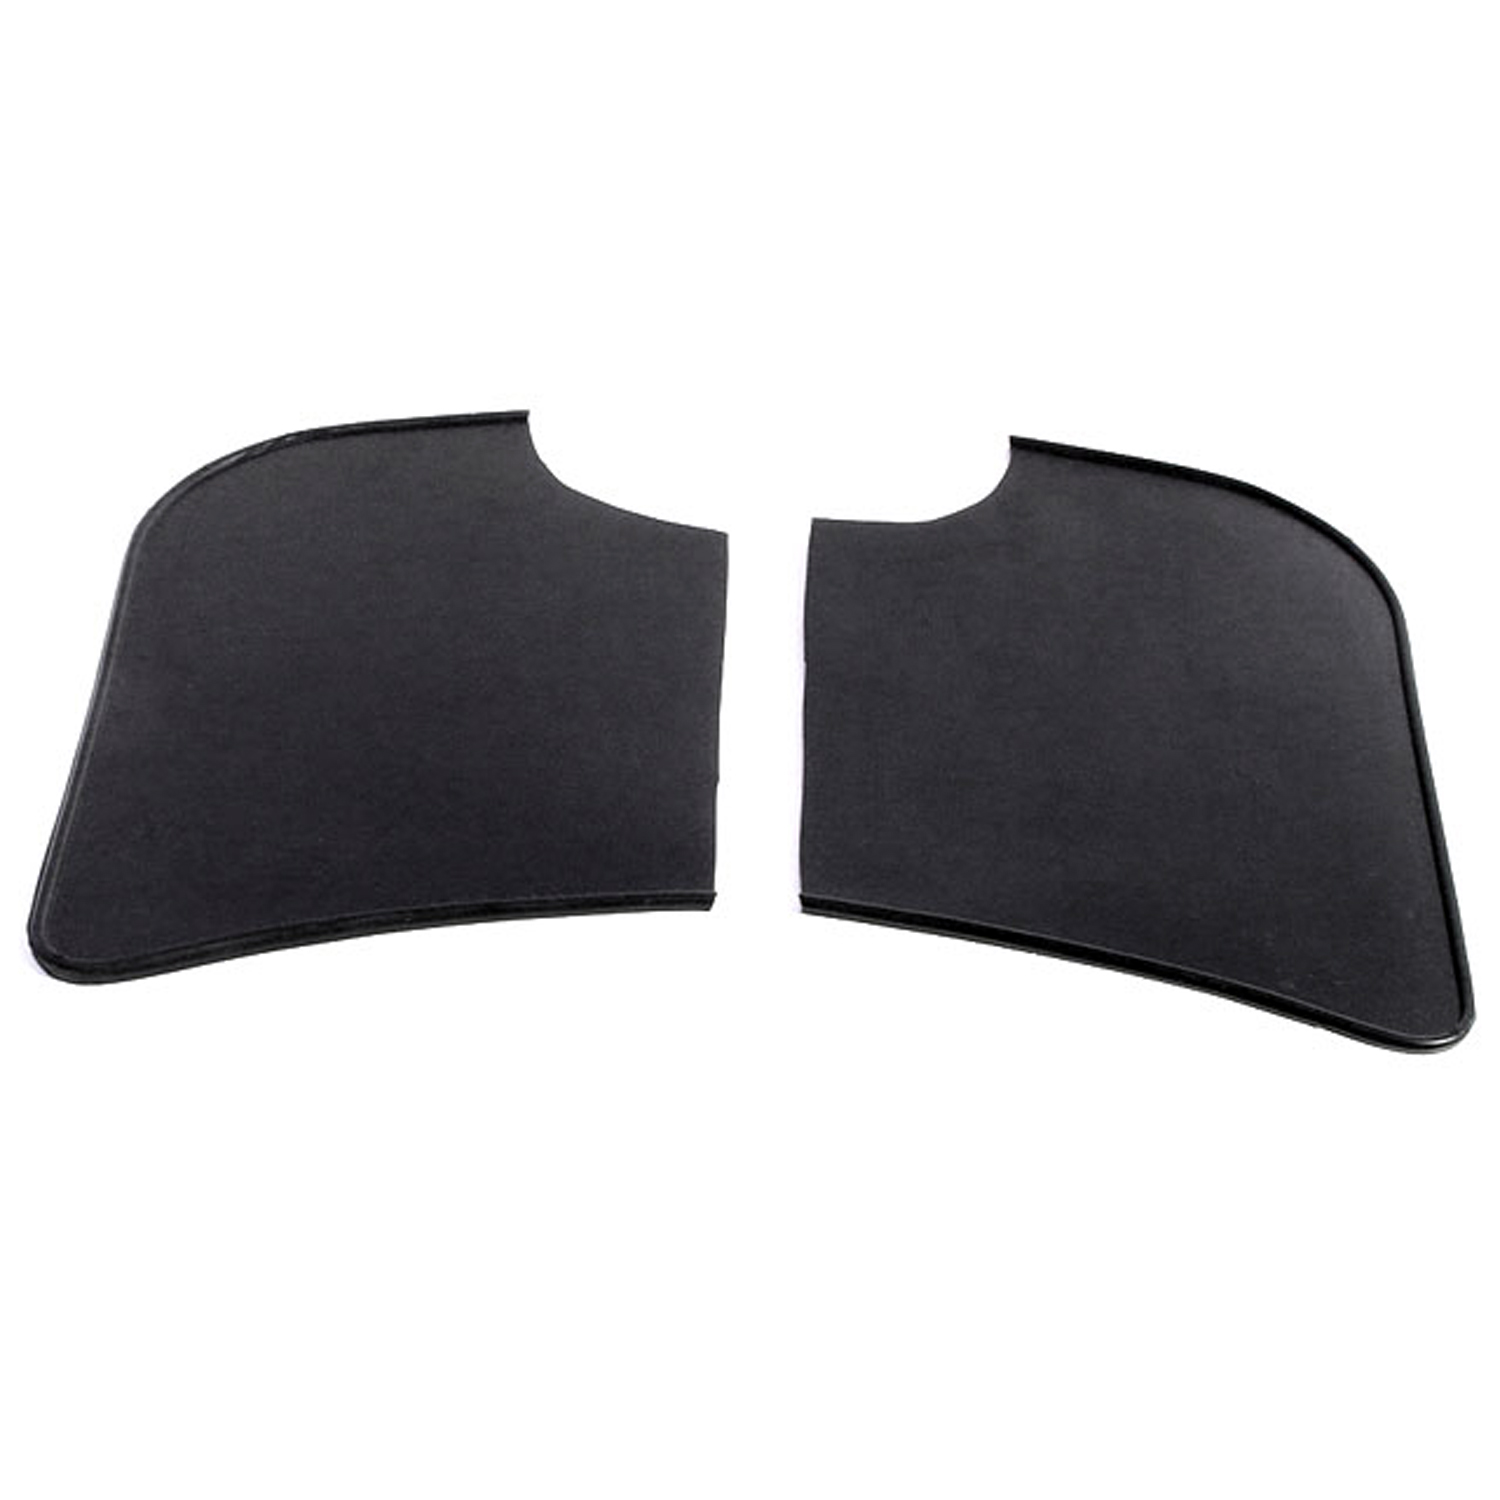 1976 Volkswagen Rabbit Gravel Shields.  Molded flat without metal backing plates-FS 40